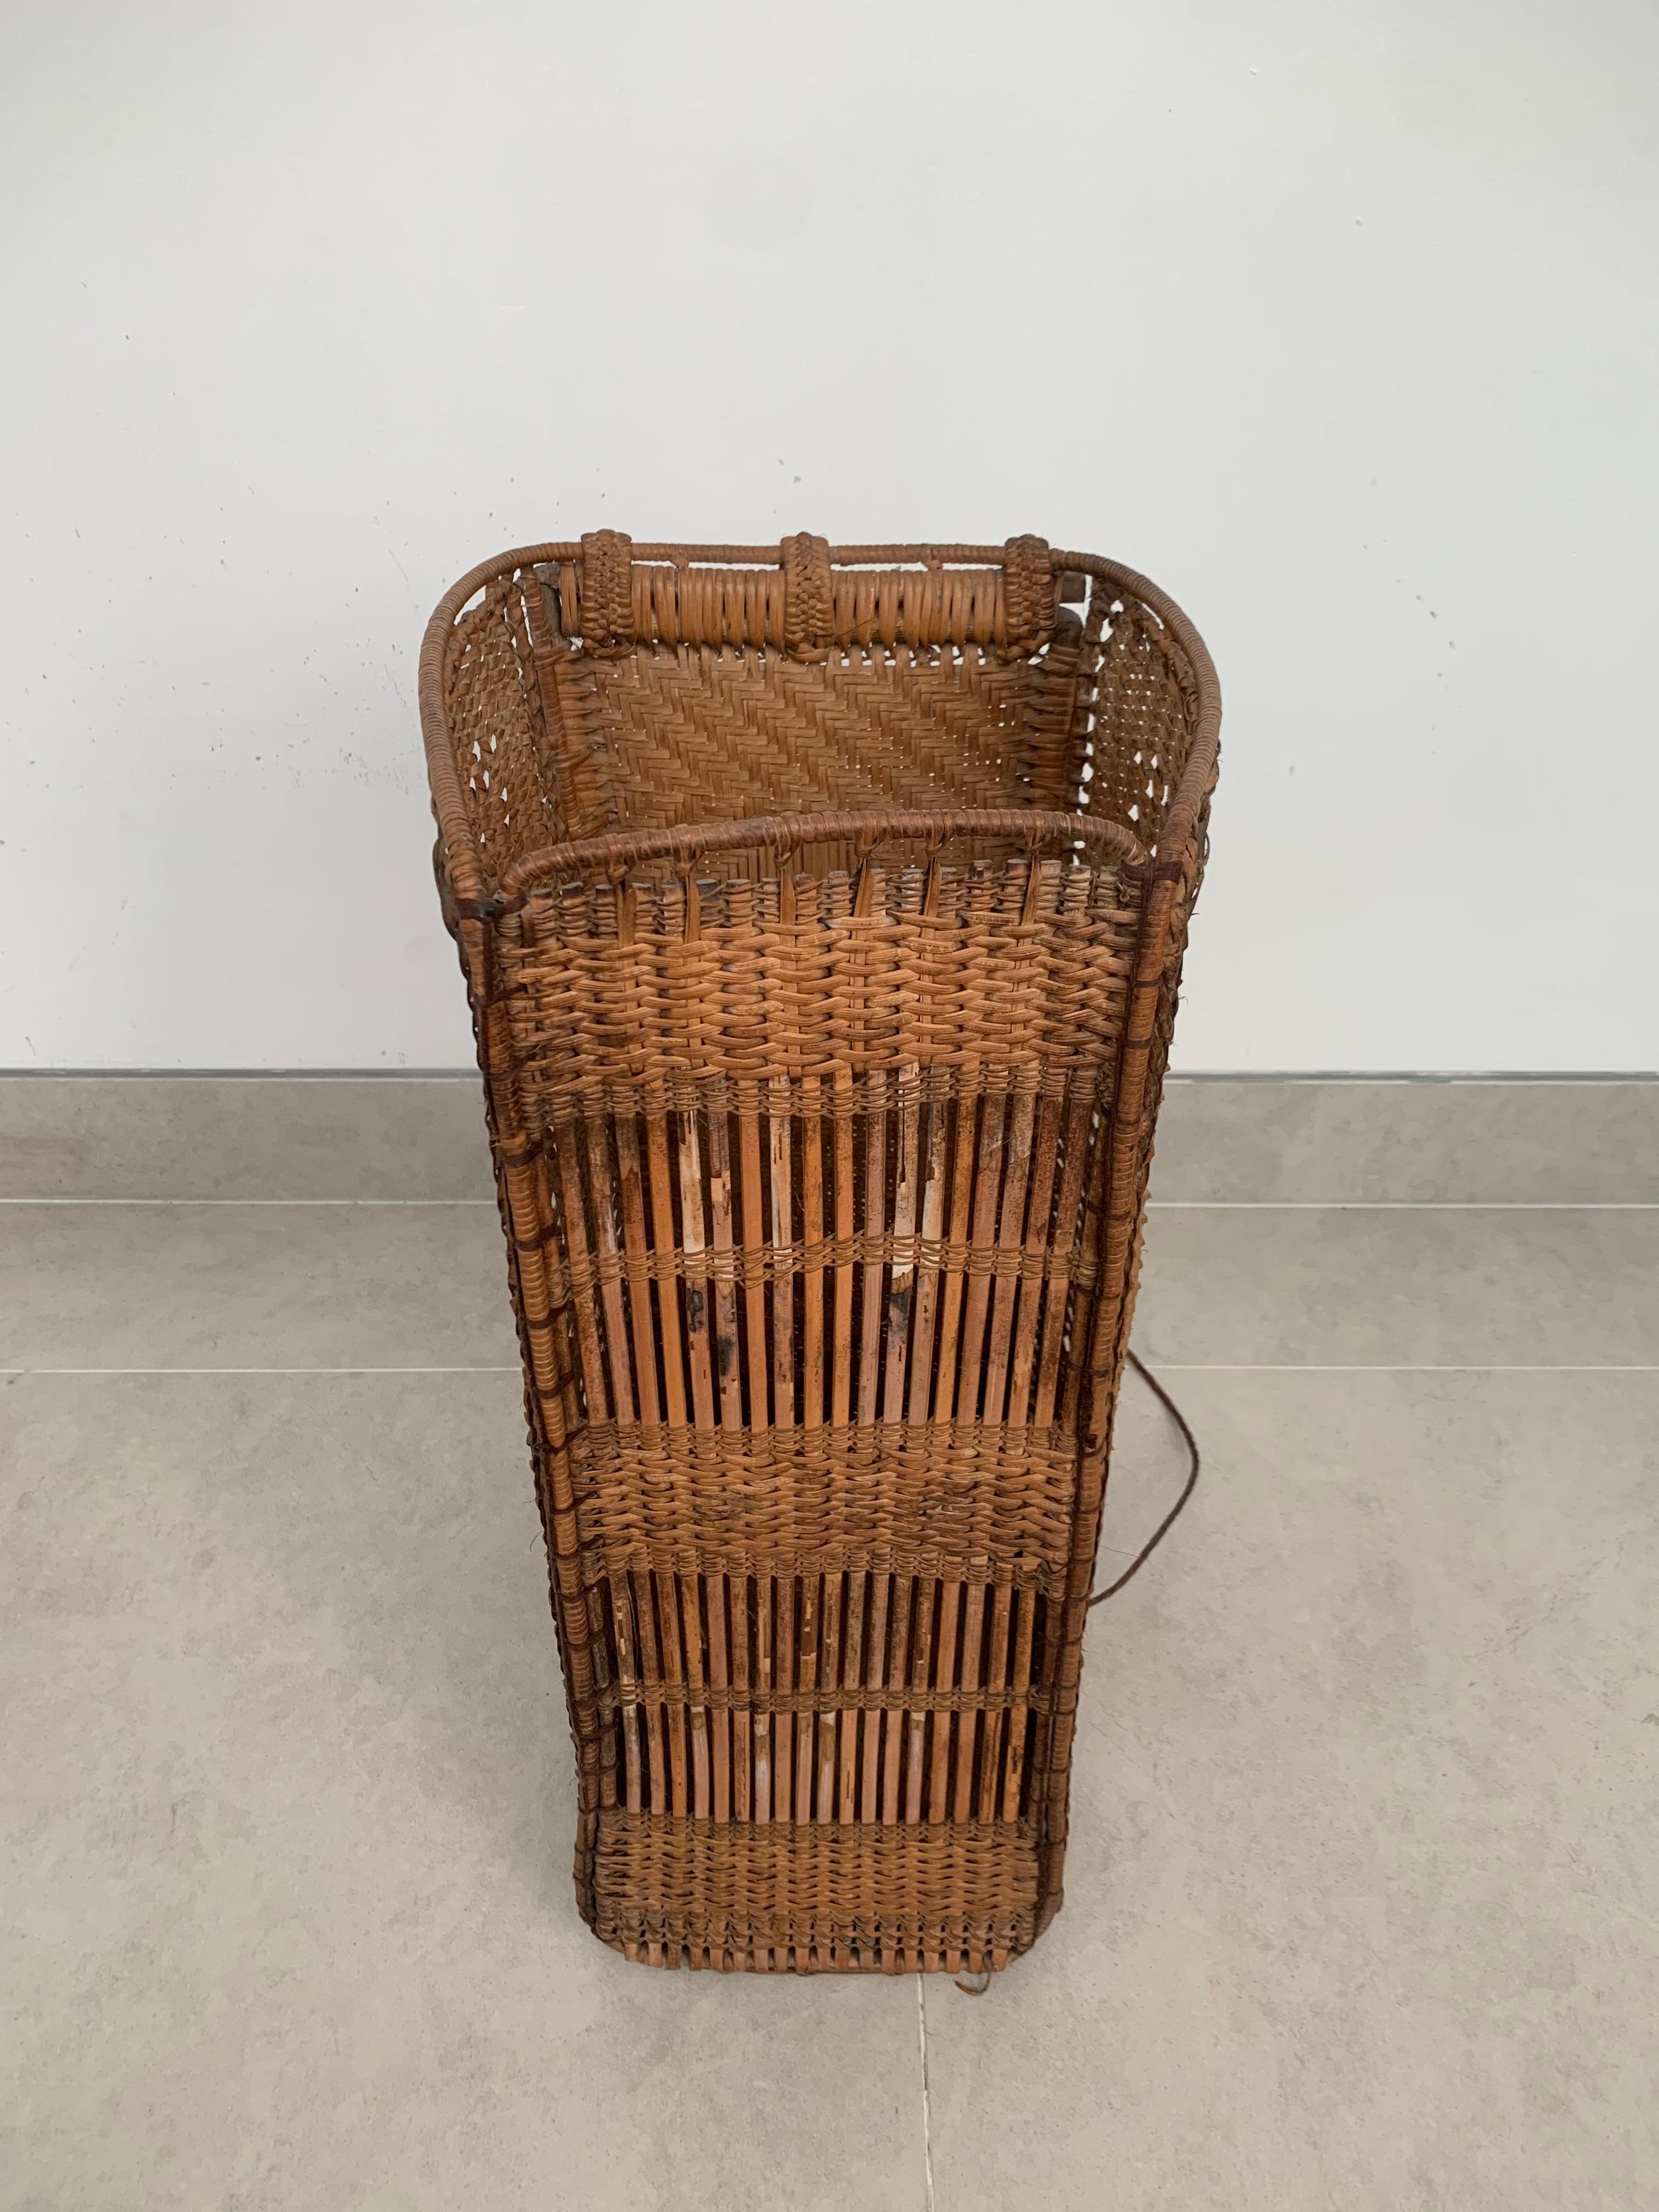 Rattan Basket Dayak Tribe Hand-Woven with Straps from Kalimantan, Borneo 2